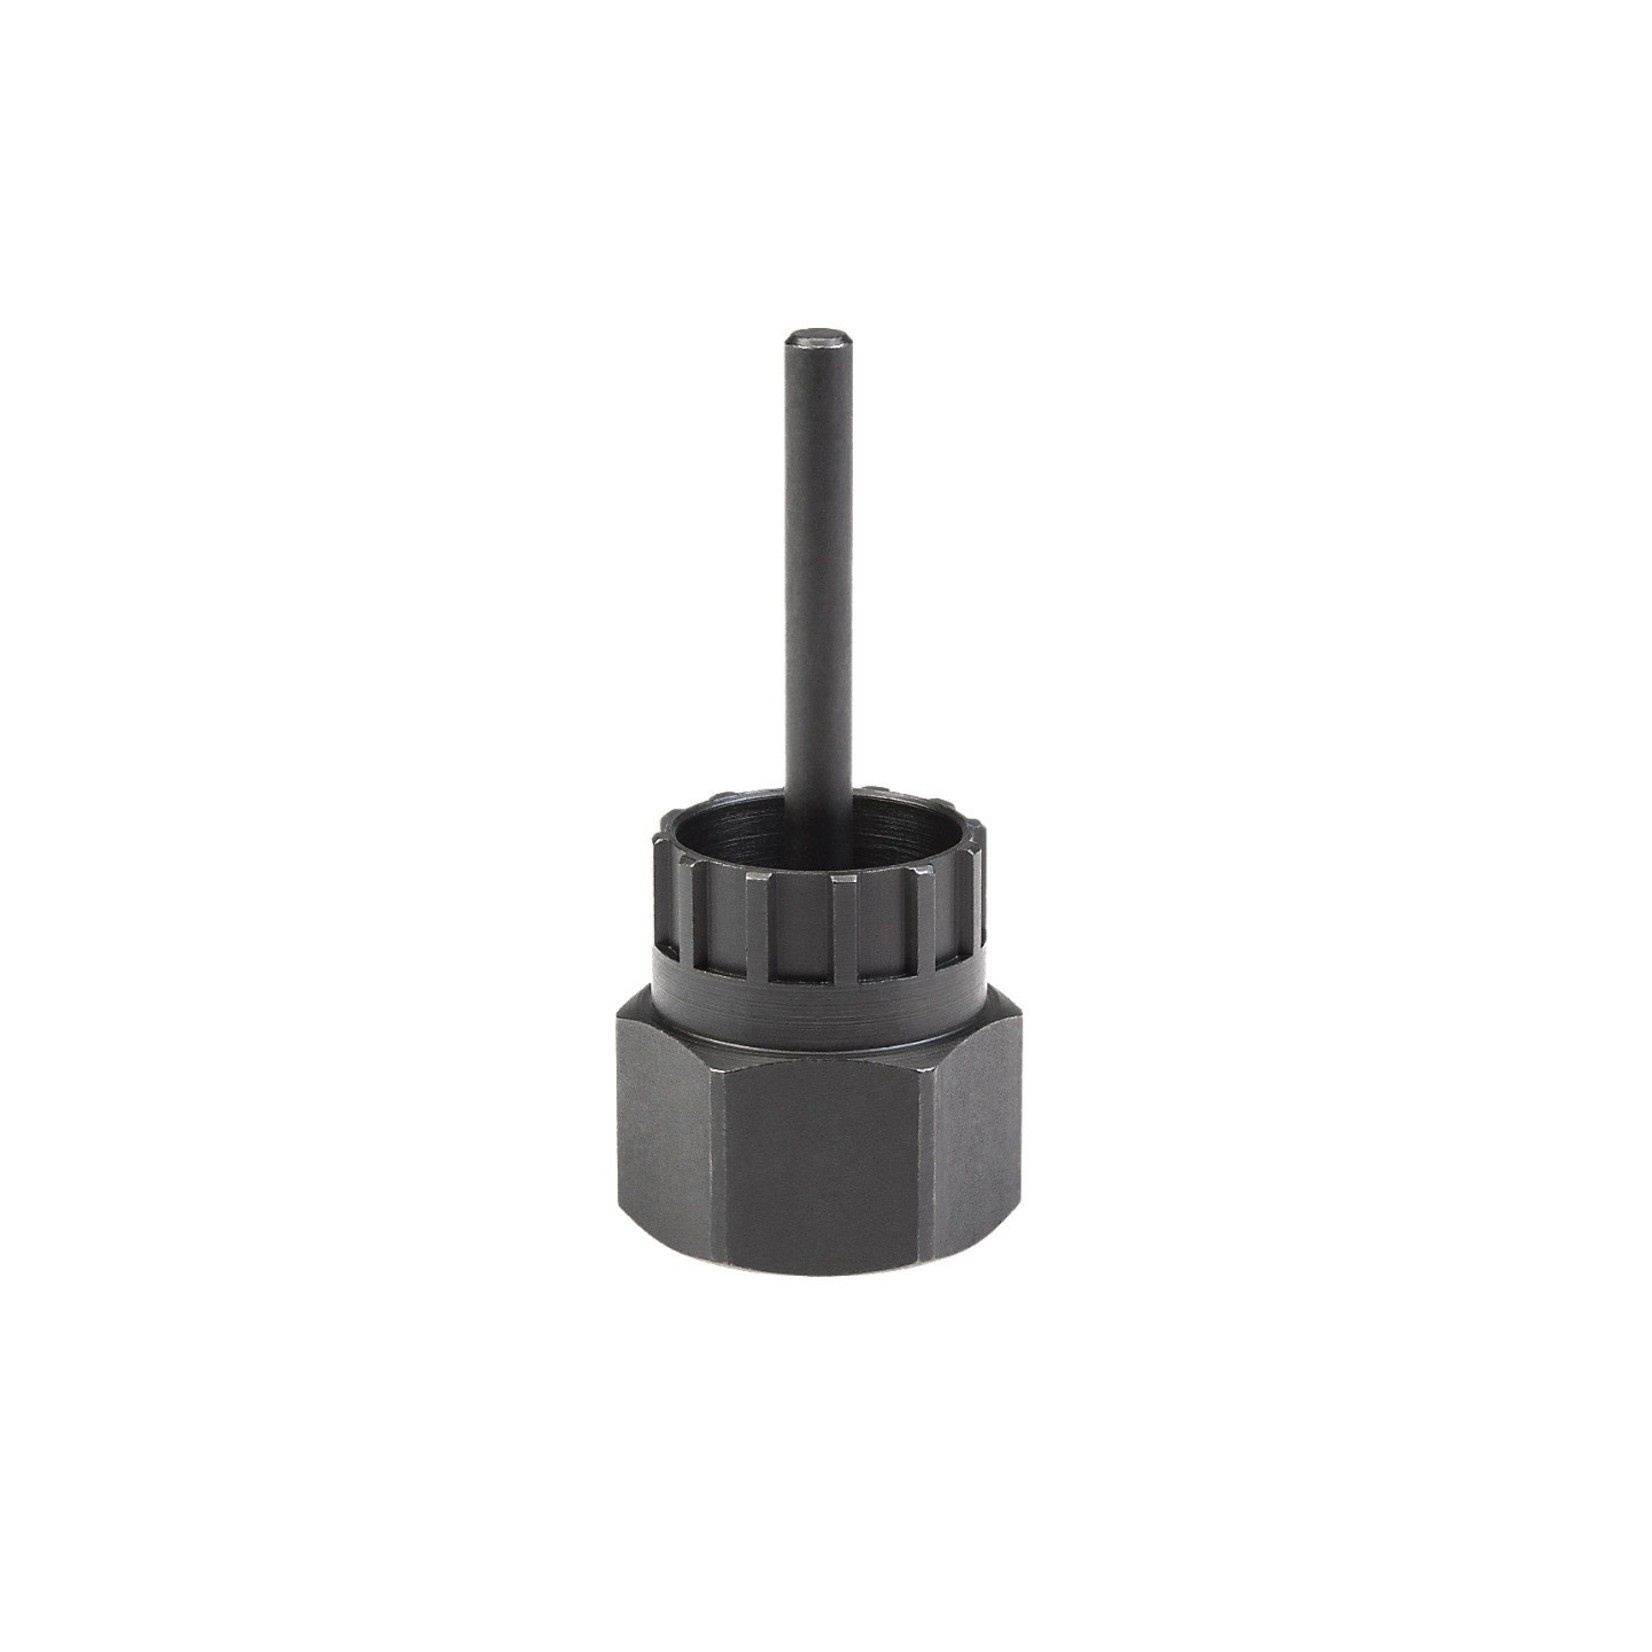 PARK TOOL Park Tool FR-5.2G Cassette Lockring Tool with 5mm Guide Pin